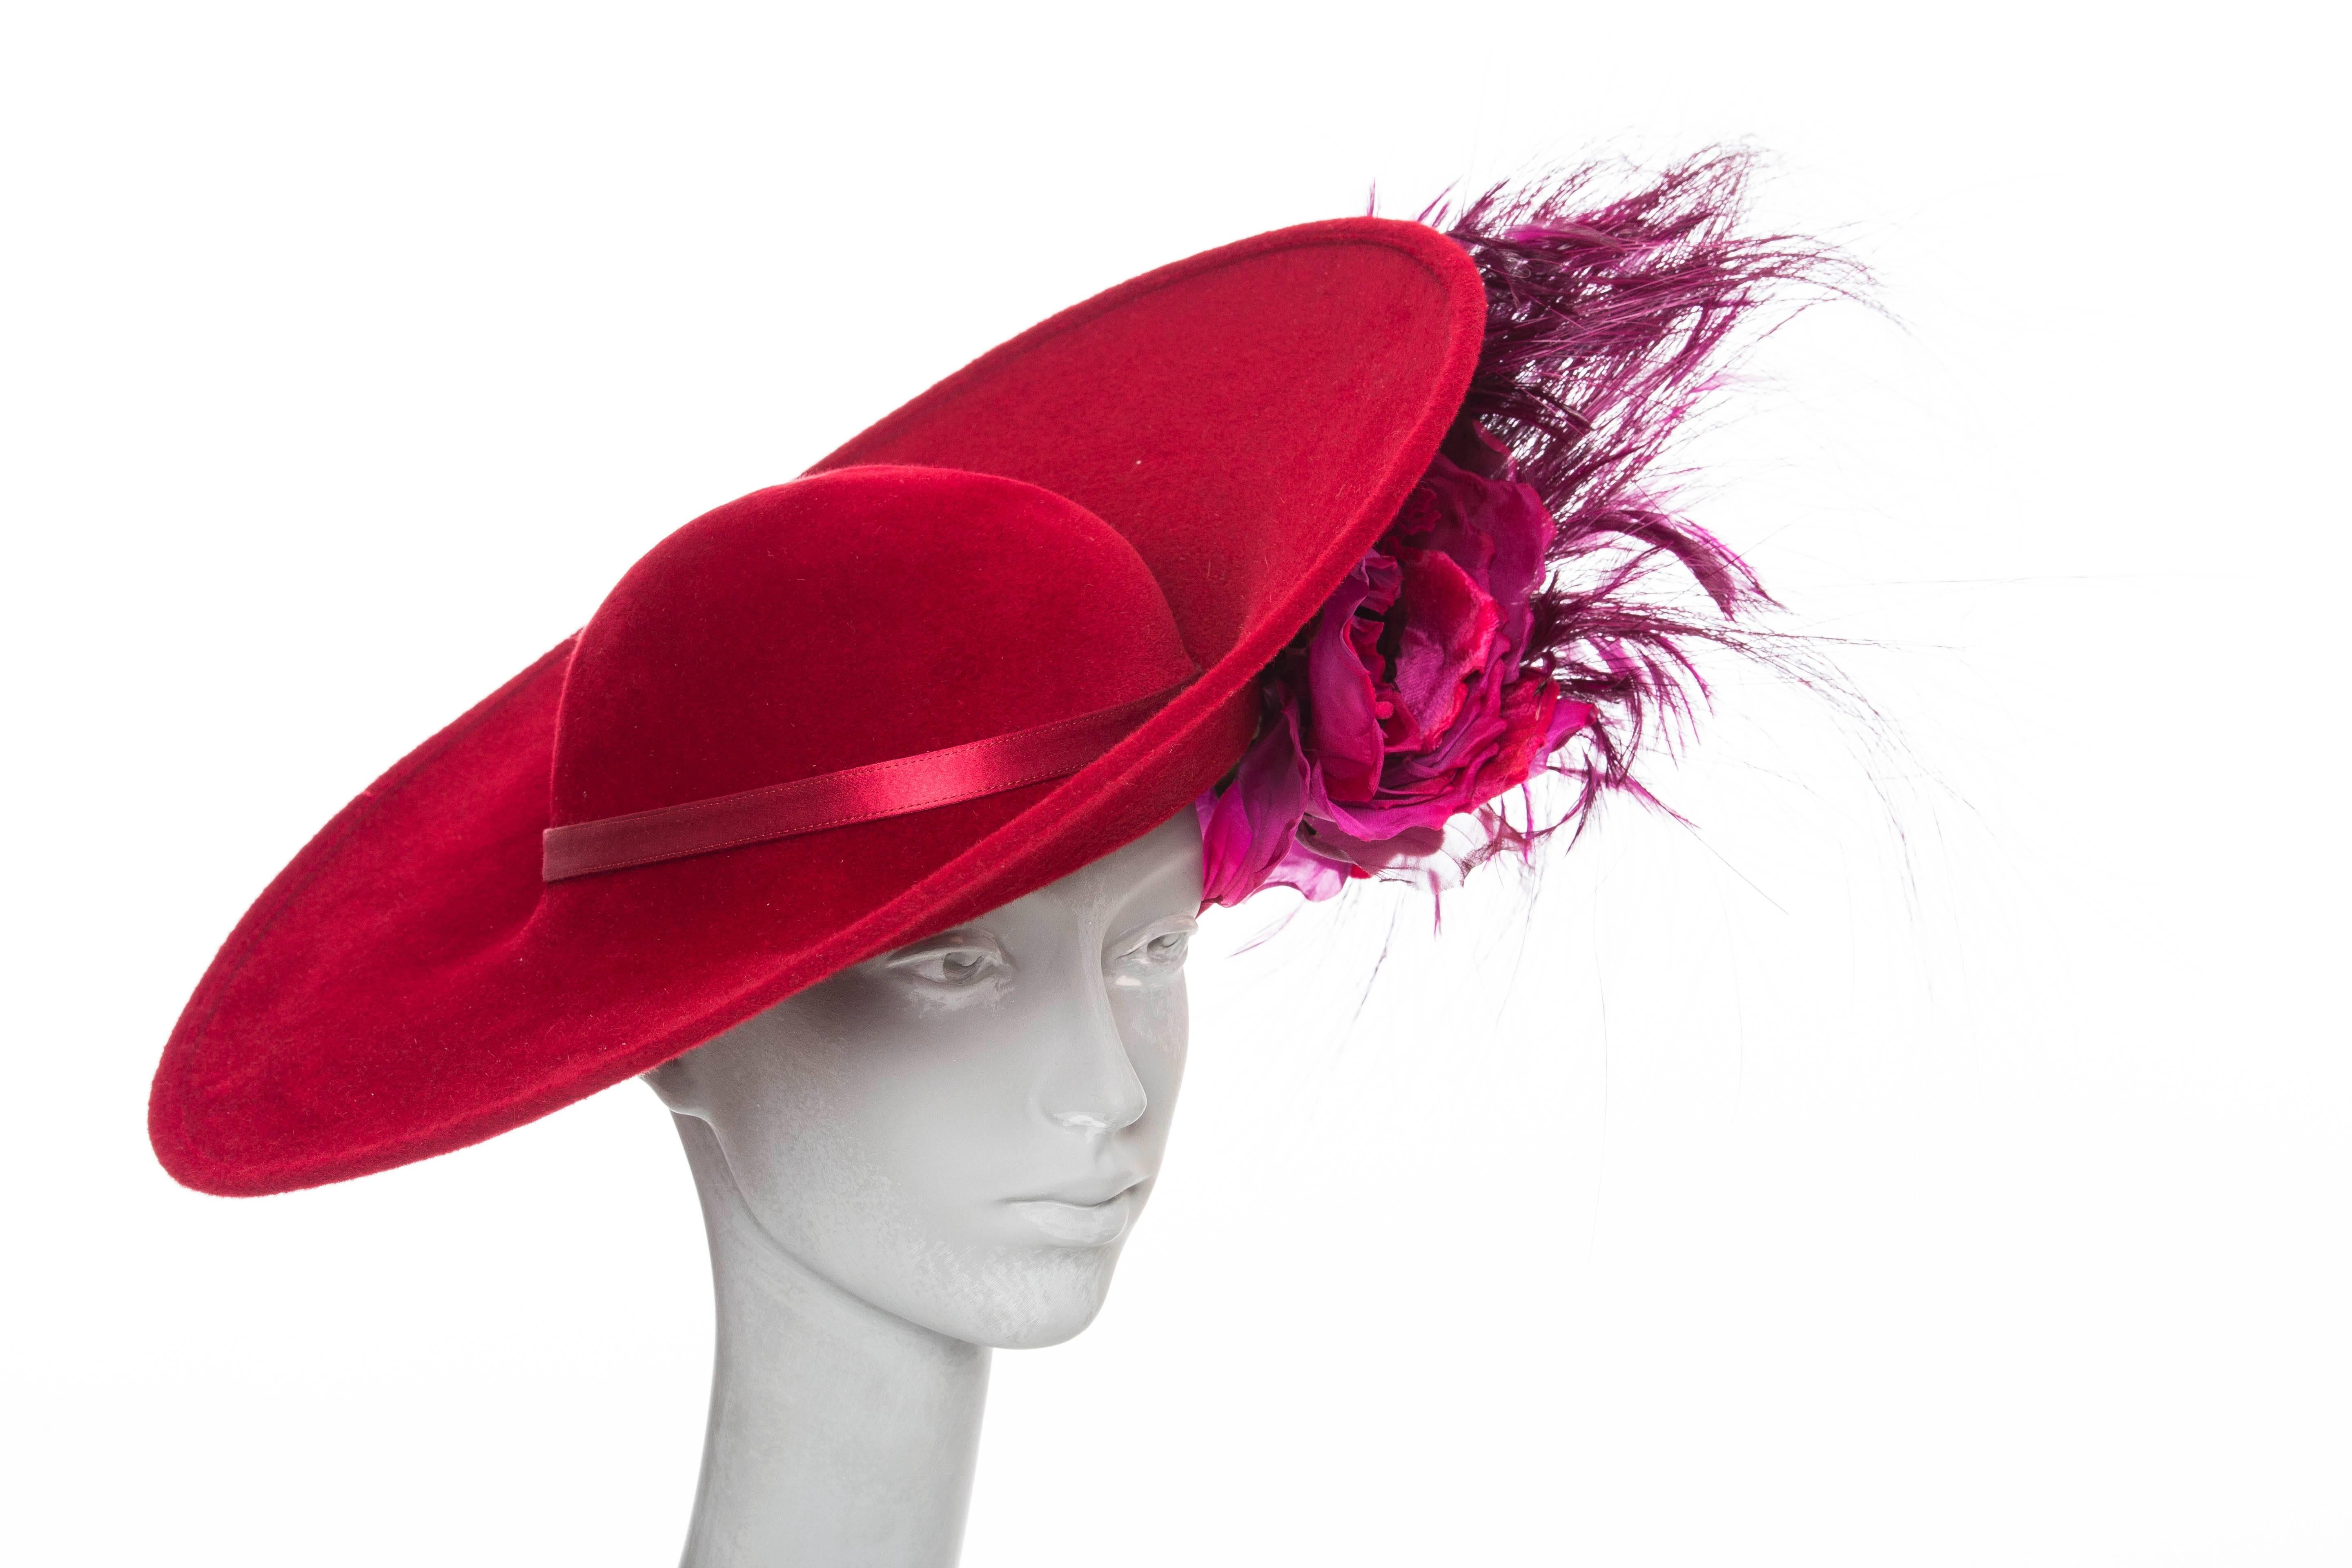  Philip Treacy wool felt statement side slice hat with floral and feature adornment at side. Includes box.

 Circumference 22”, Brim 5”
